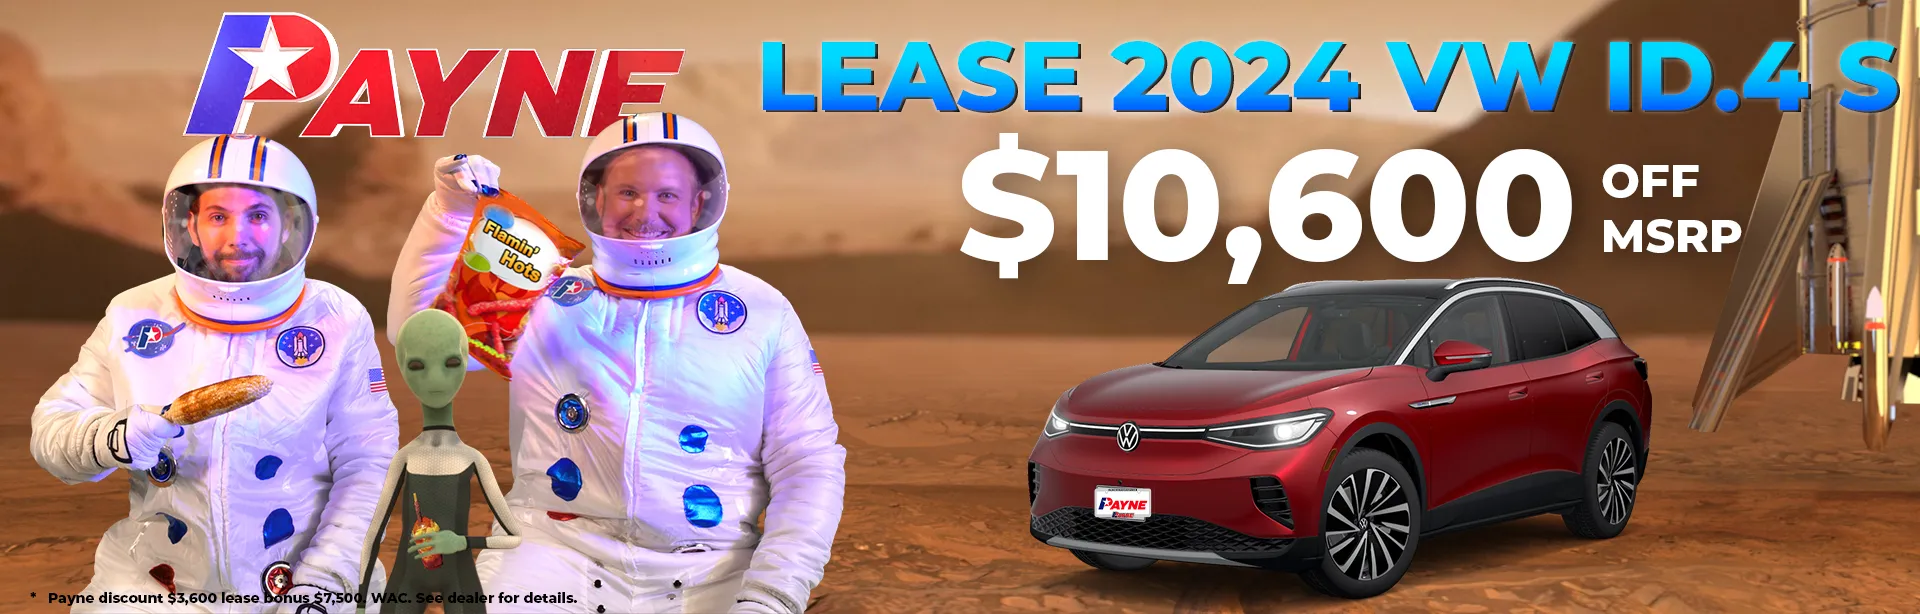 Get $10,600 off MSRP when you Lease a 2024 VW ID.4 S